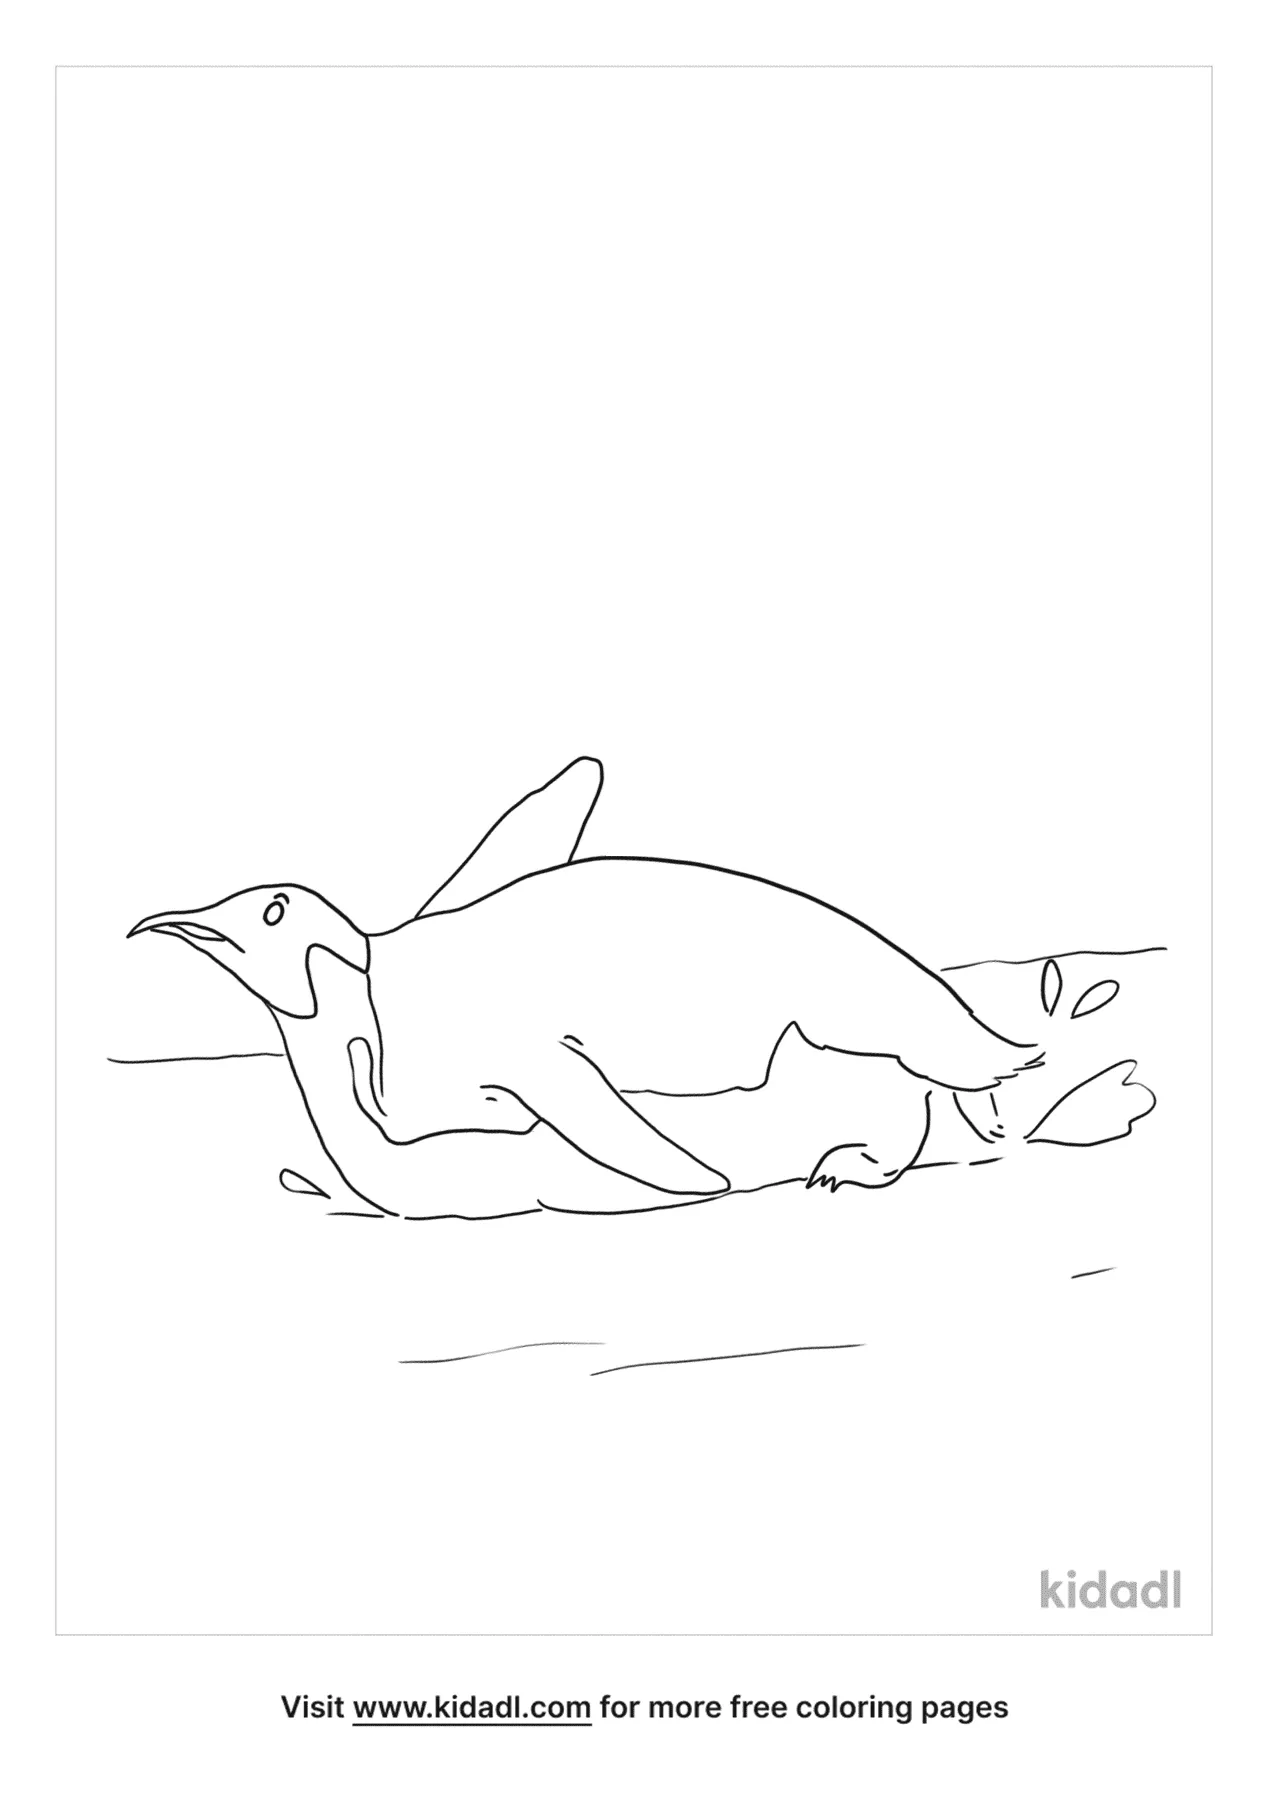 Penguin Gliding Coloring Page